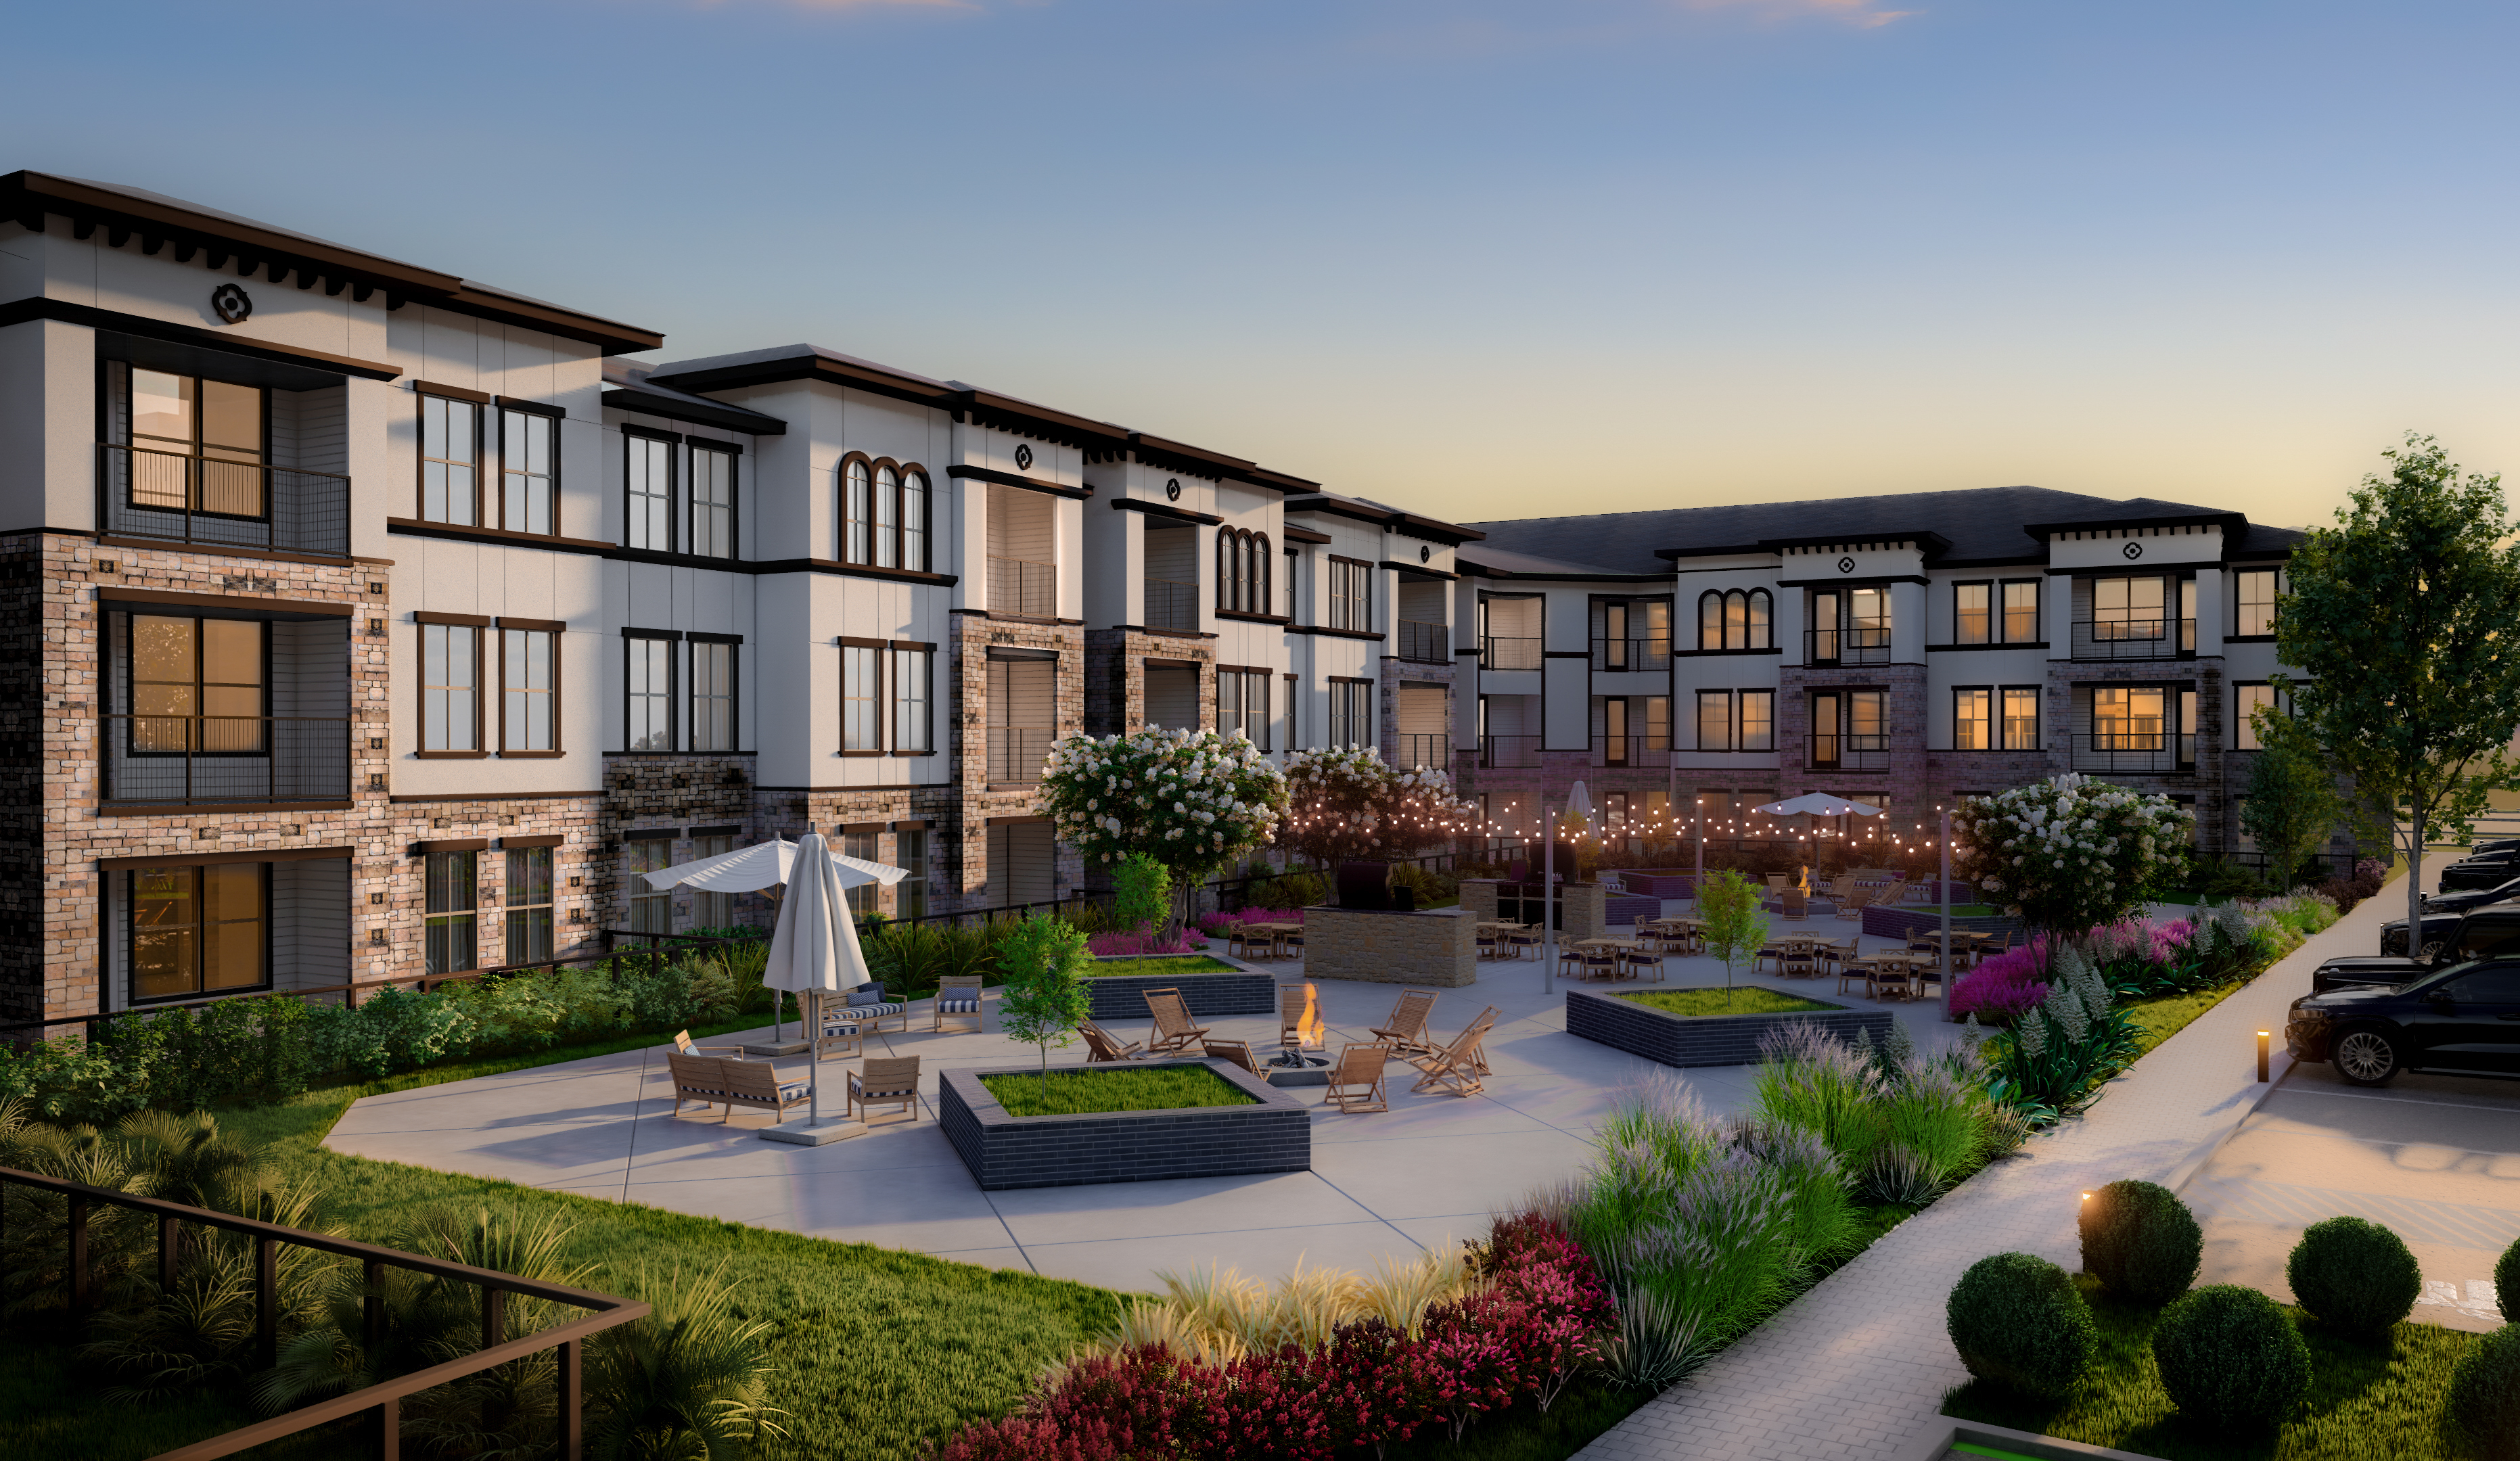 JPI, Madera Residential, and WayMaker to Develop Over 1,750 Multifamily Units Across Thriving Dallas-Fort Worth Metroplex